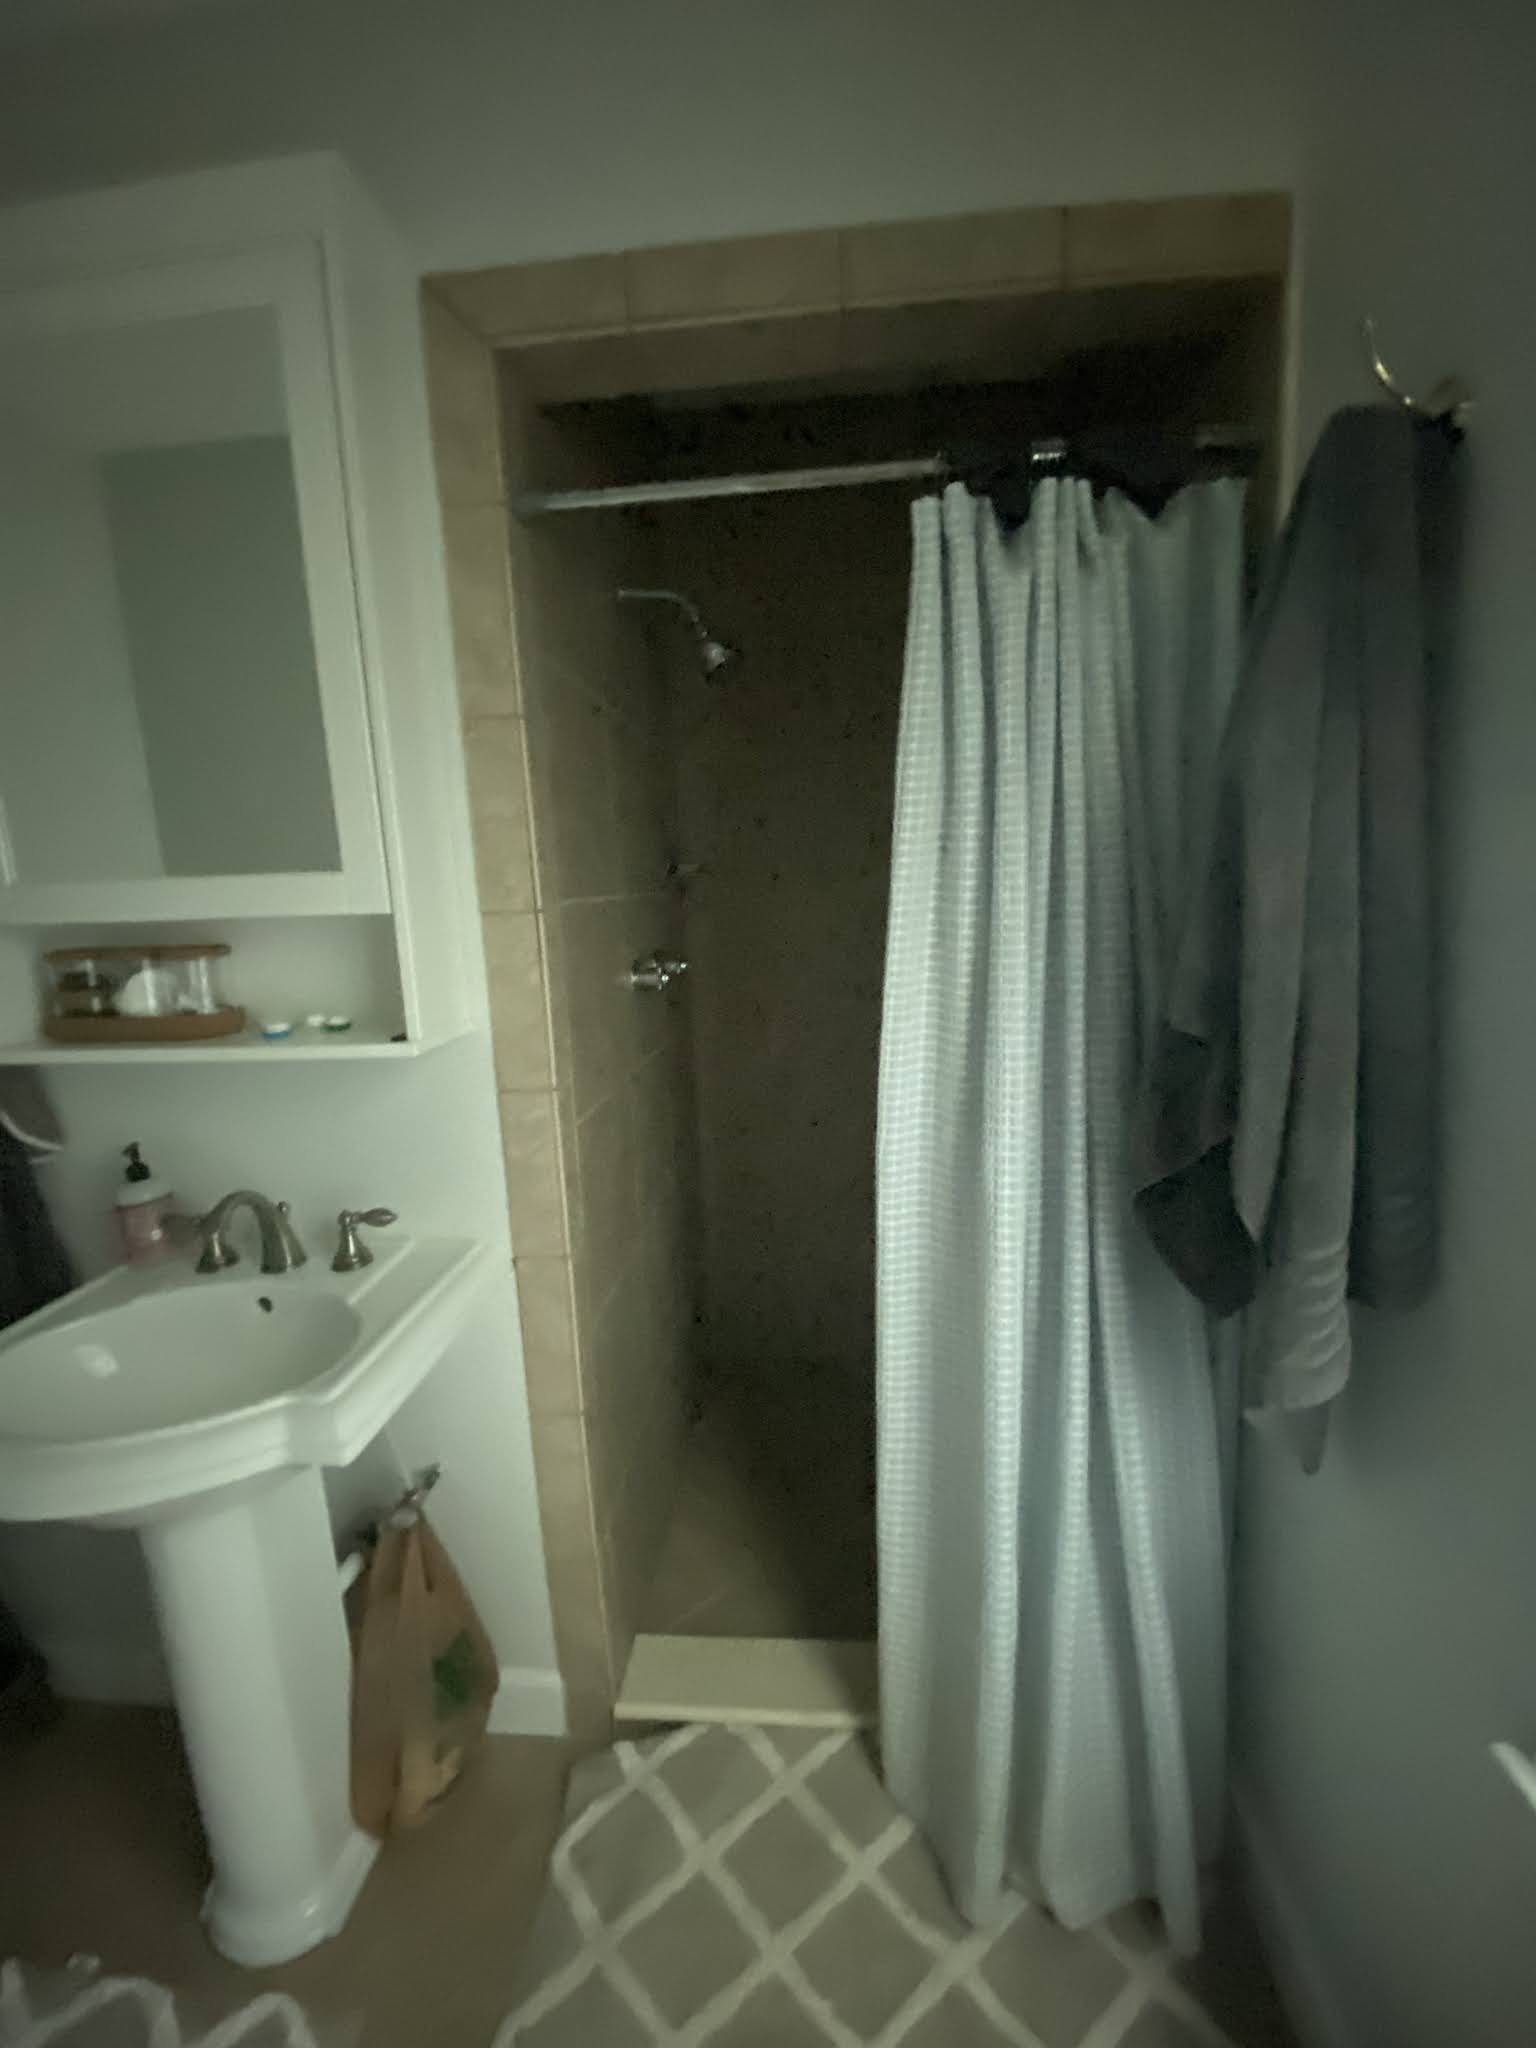 Owner's Bathroom Before and After Reveal